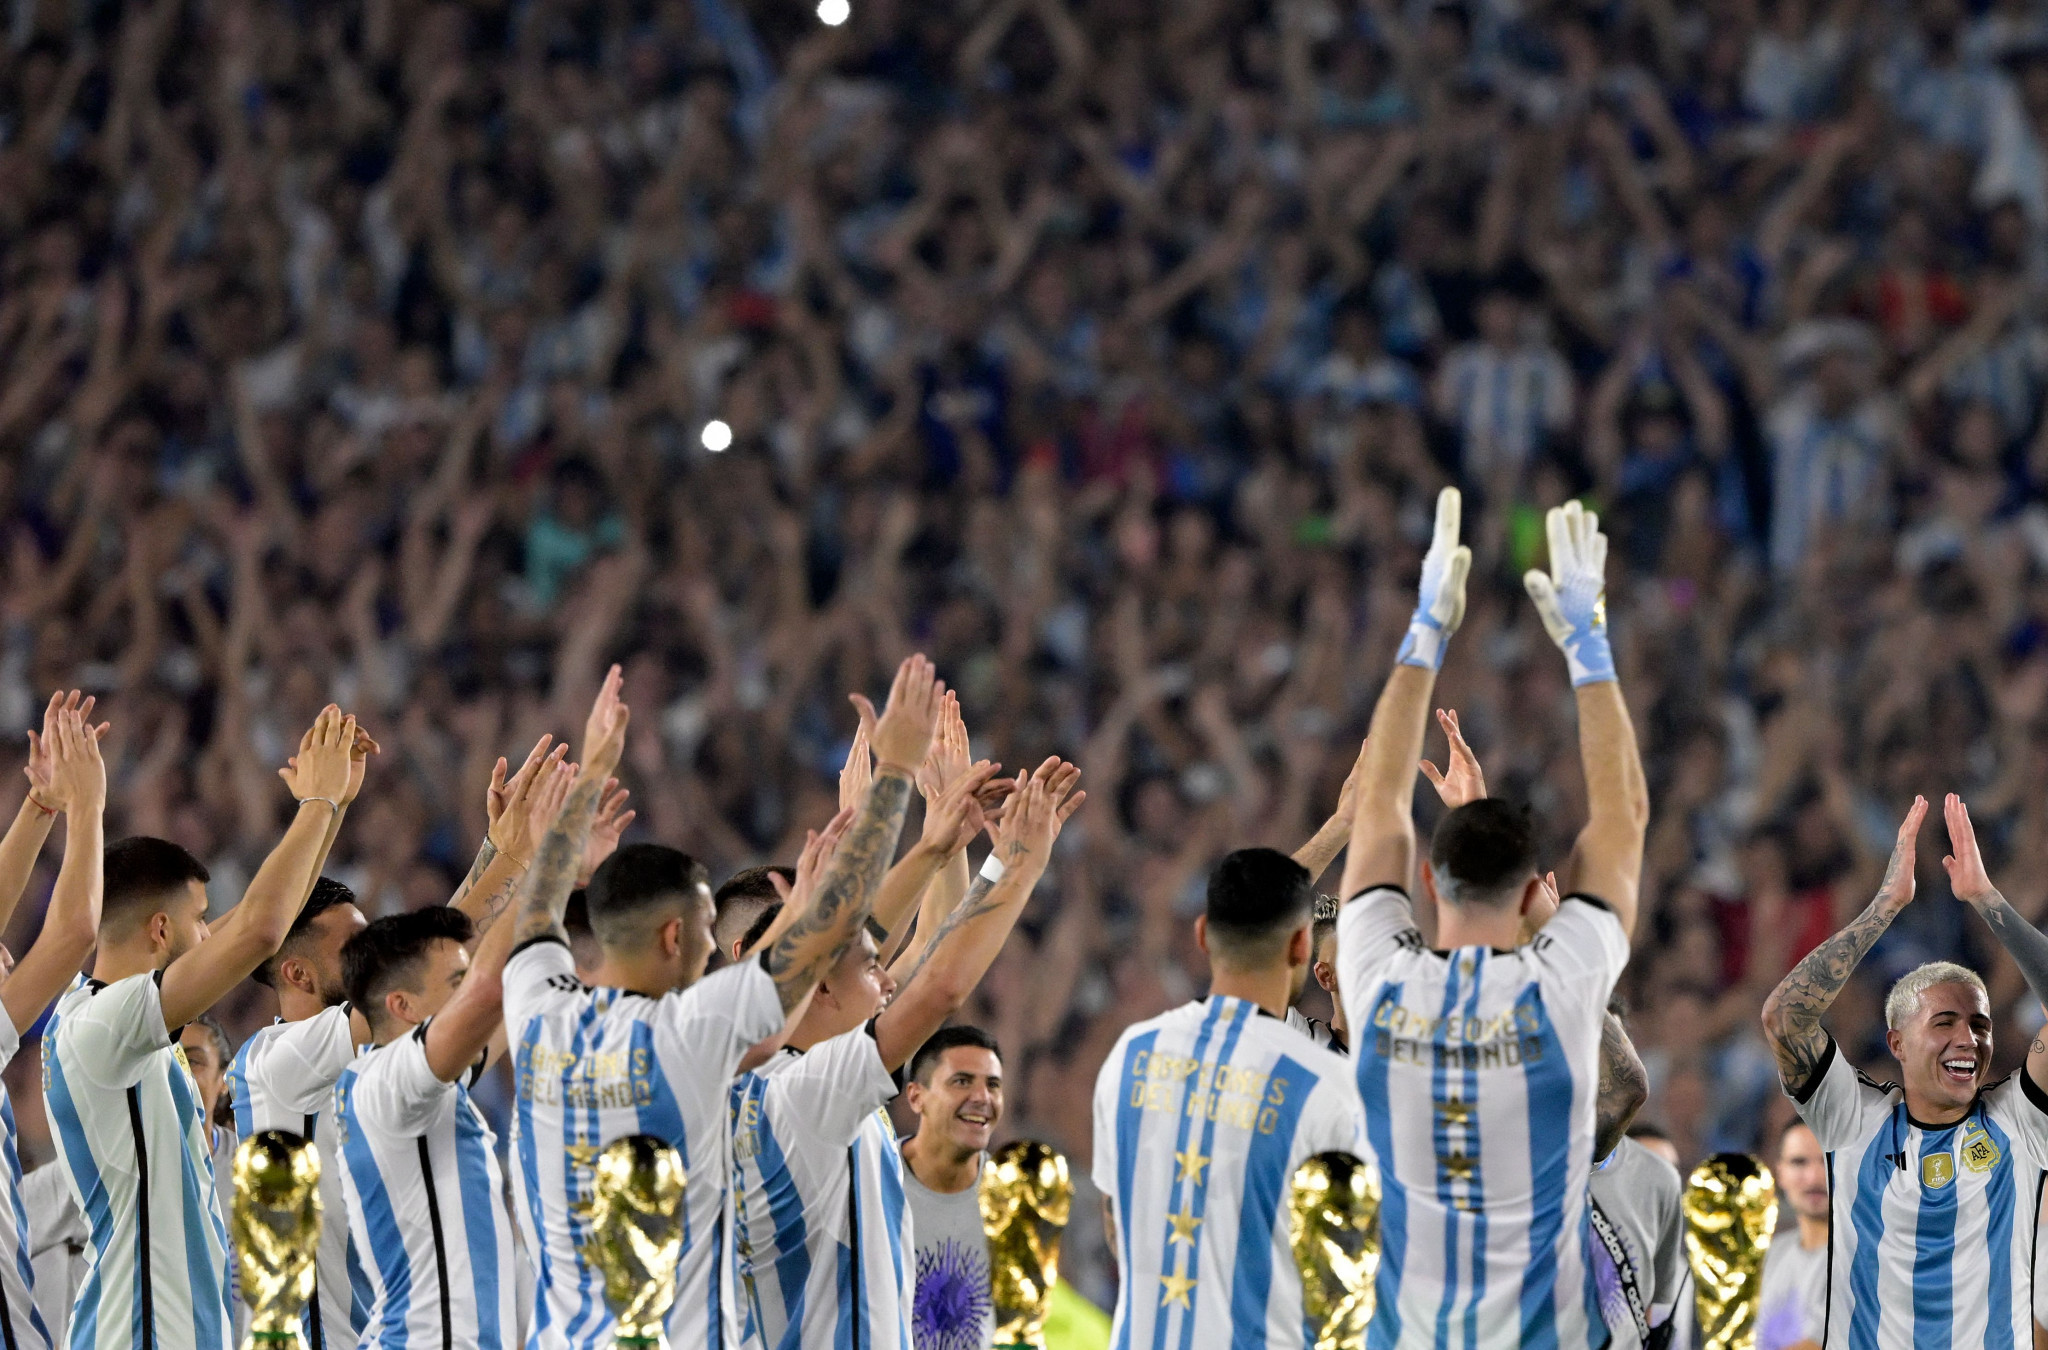 Argentina's men's football team were welcomed by fans in their first match since winning the FIFA World Cup ©Getty Images